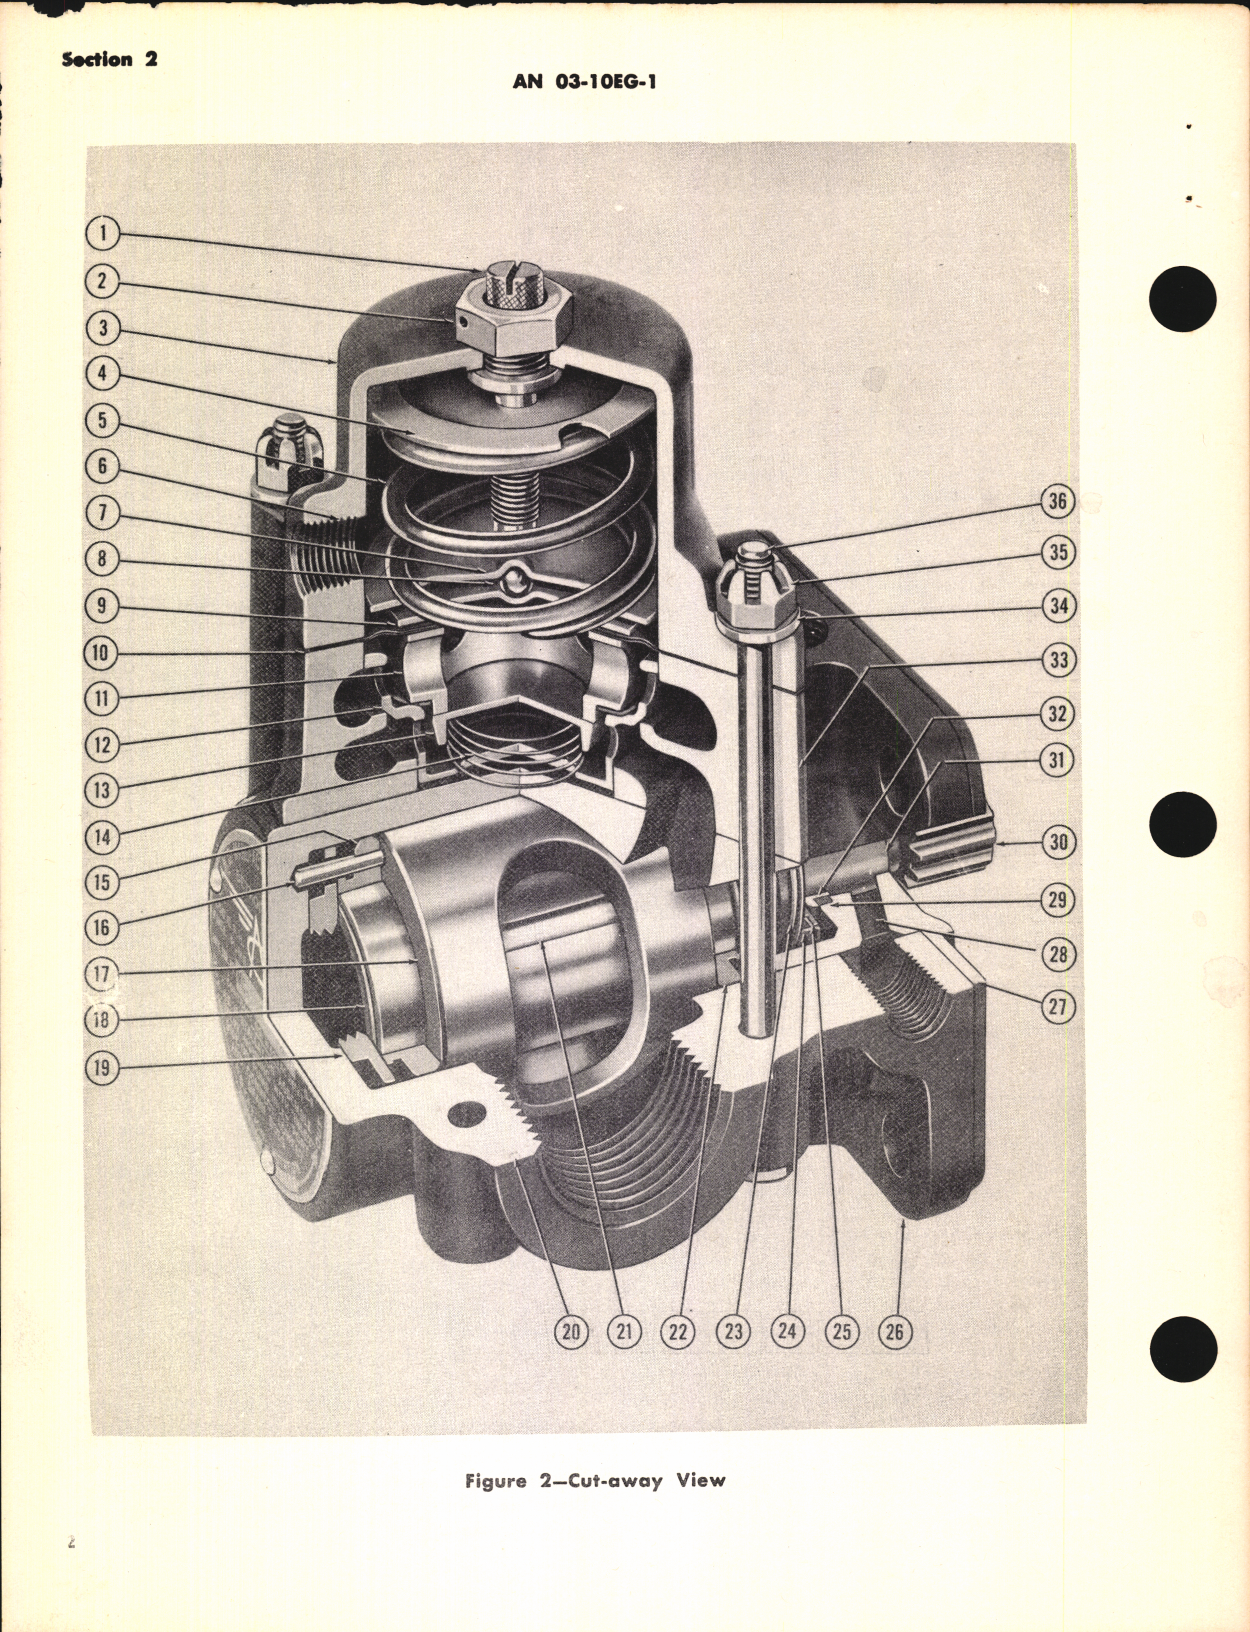 Sample page 6 from AirCorps Library document: Operation, Service, & Overhaul Instructions with Parts Catalog for Engine-Driven Fuel Pump Type AN4101 (G-9)